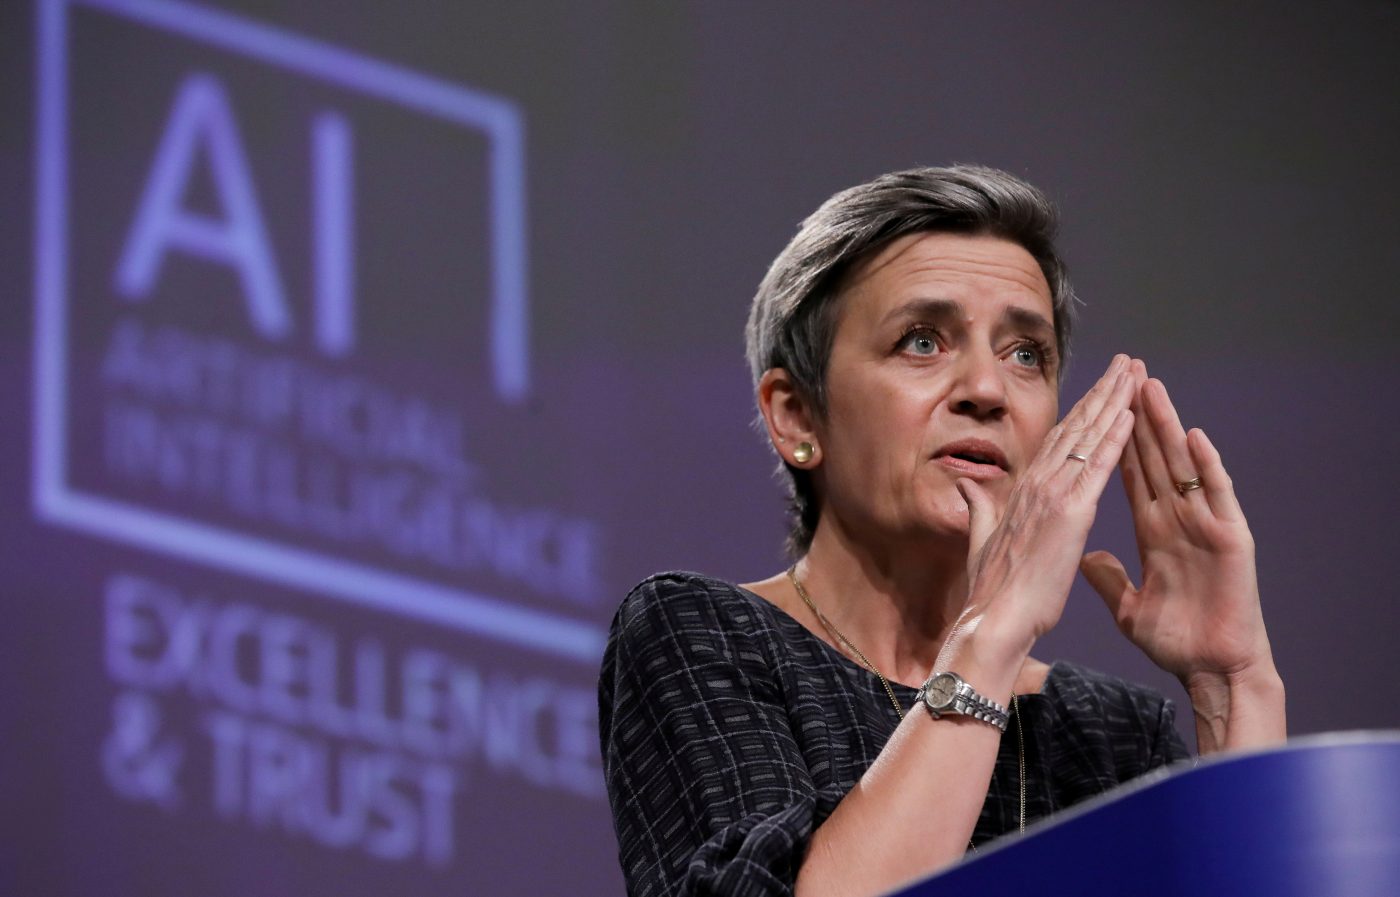 Photo: European Executive Vice-President Margrethe Vestager speaks at a media conference on the EU approach to Artificial Intelligence following a weekly meeting of EU Commission in Brussels, Belgium, April 21, 2021. Credit: Olivier Hoslet/Pool via REUTERS